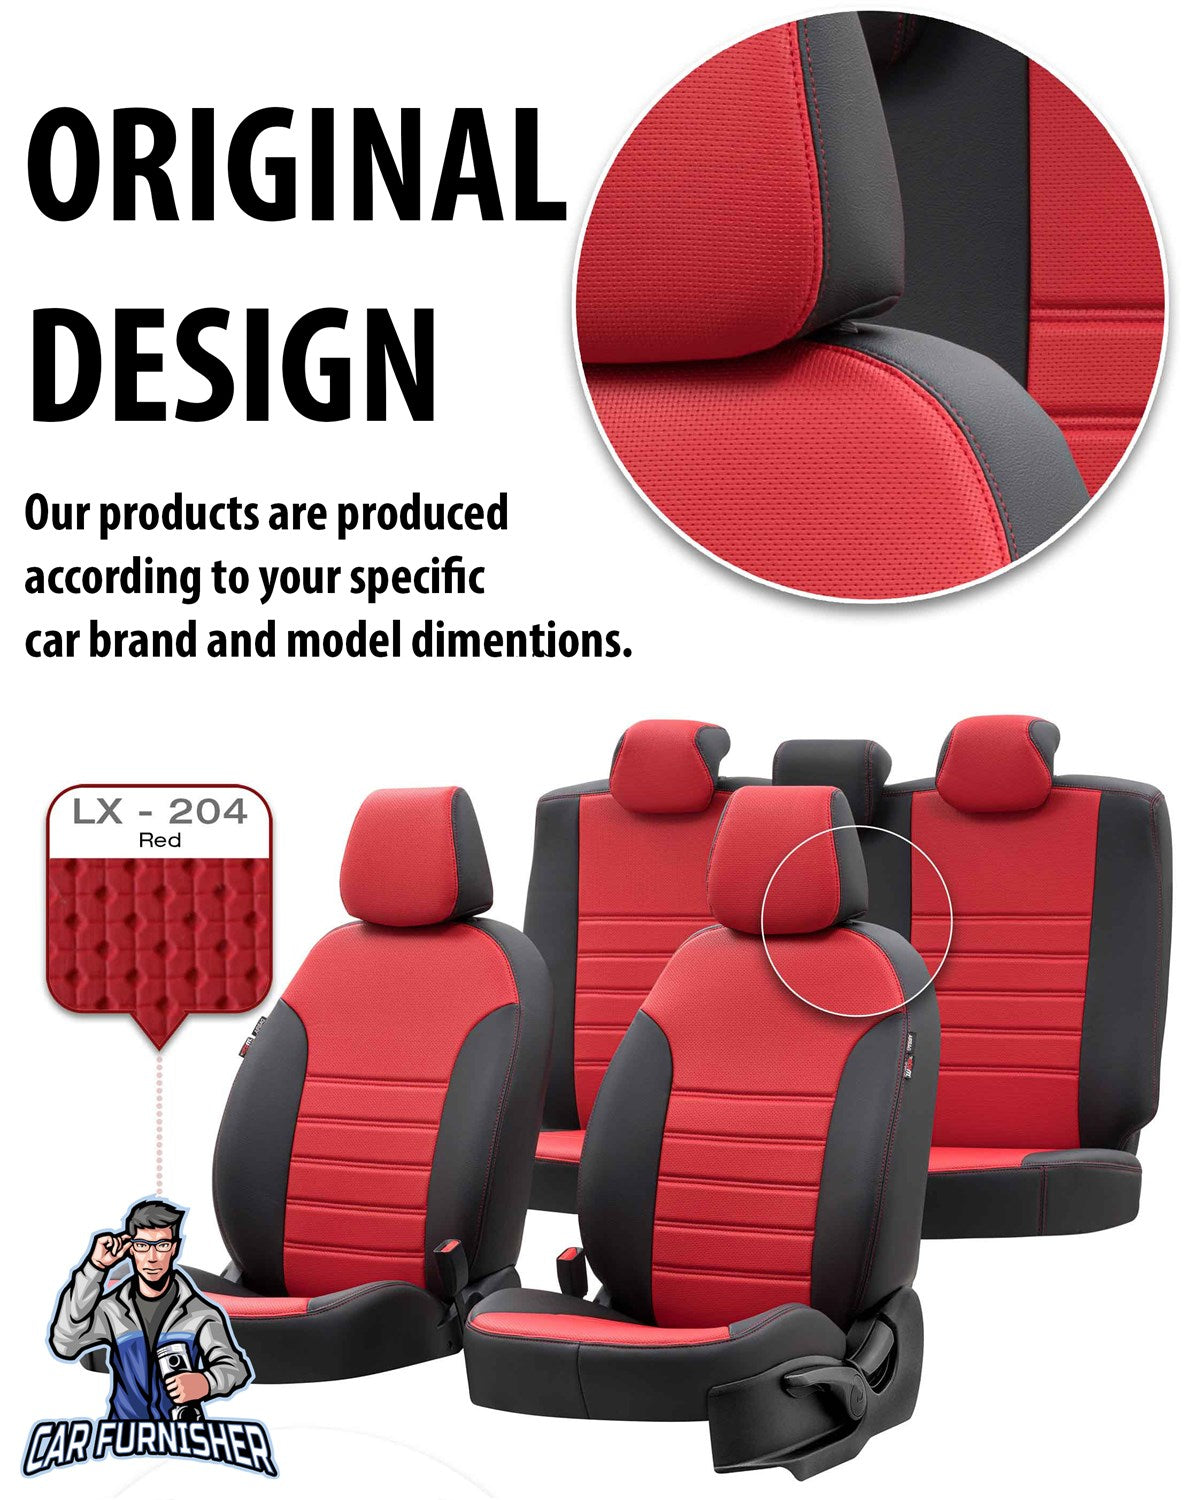 Volkswagen Golf Seat Cover New York Leather Design Red Leather